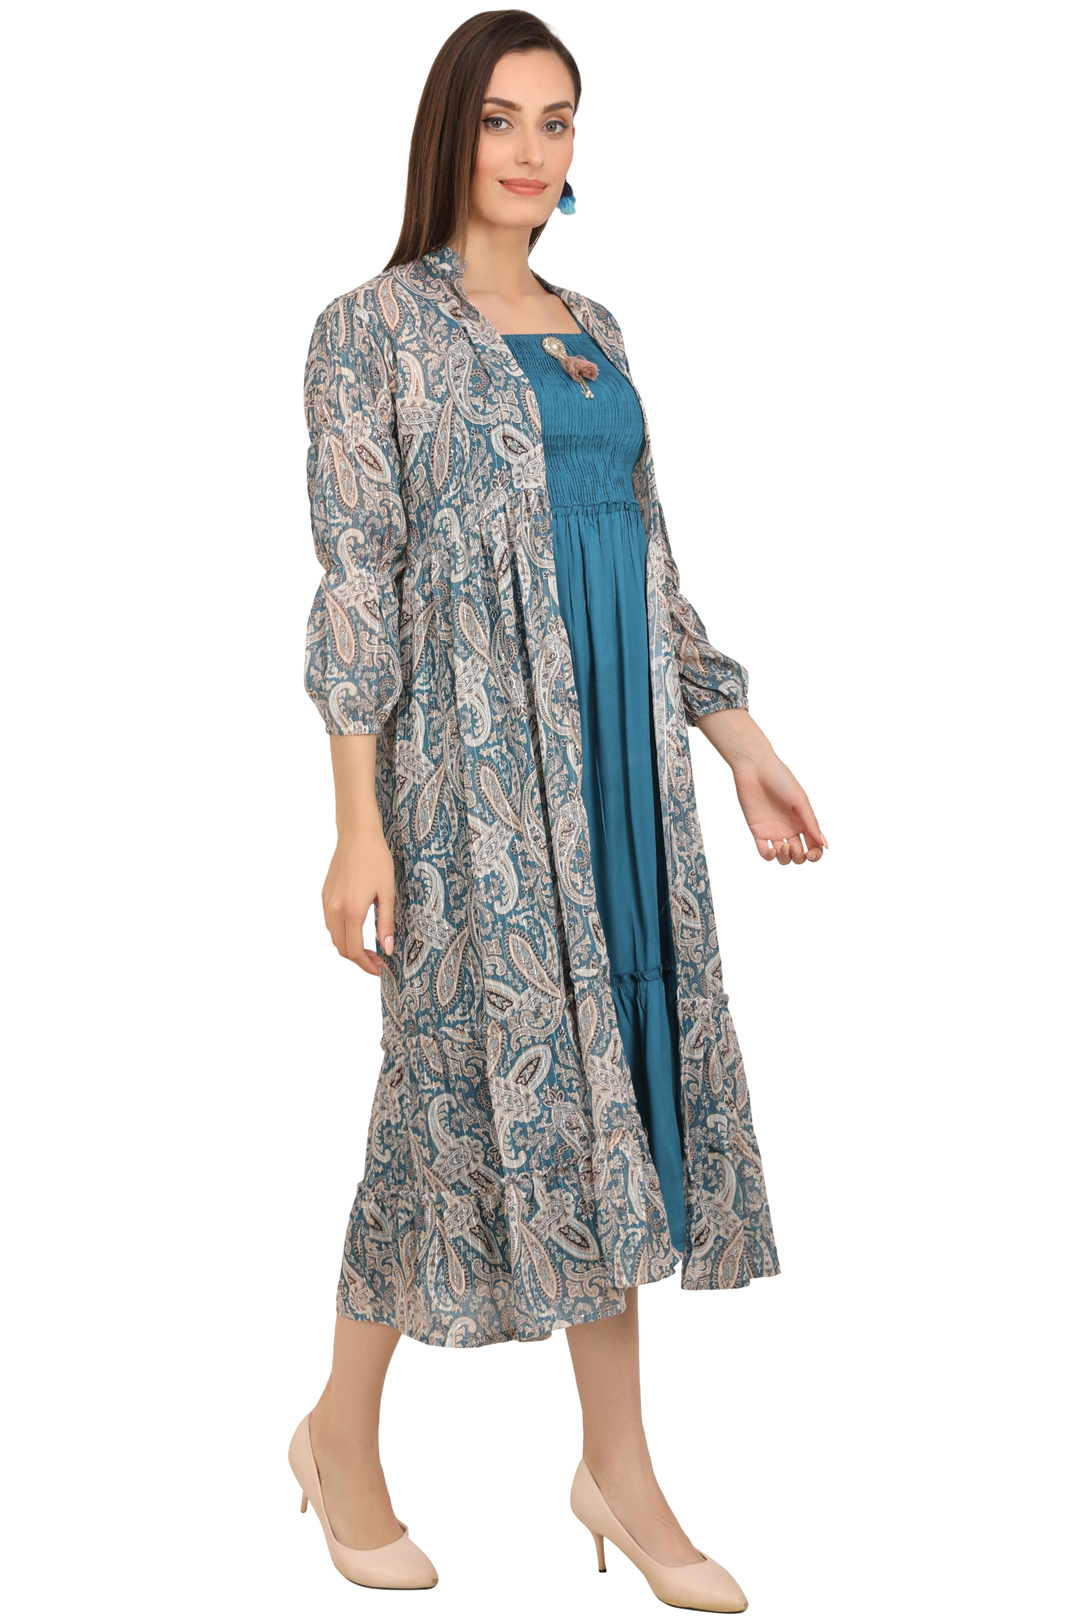 Buy SCAKHI Peach Floral Print Ethnic Dress With Long Shrug for Women's  Online @ Tata CLiQ